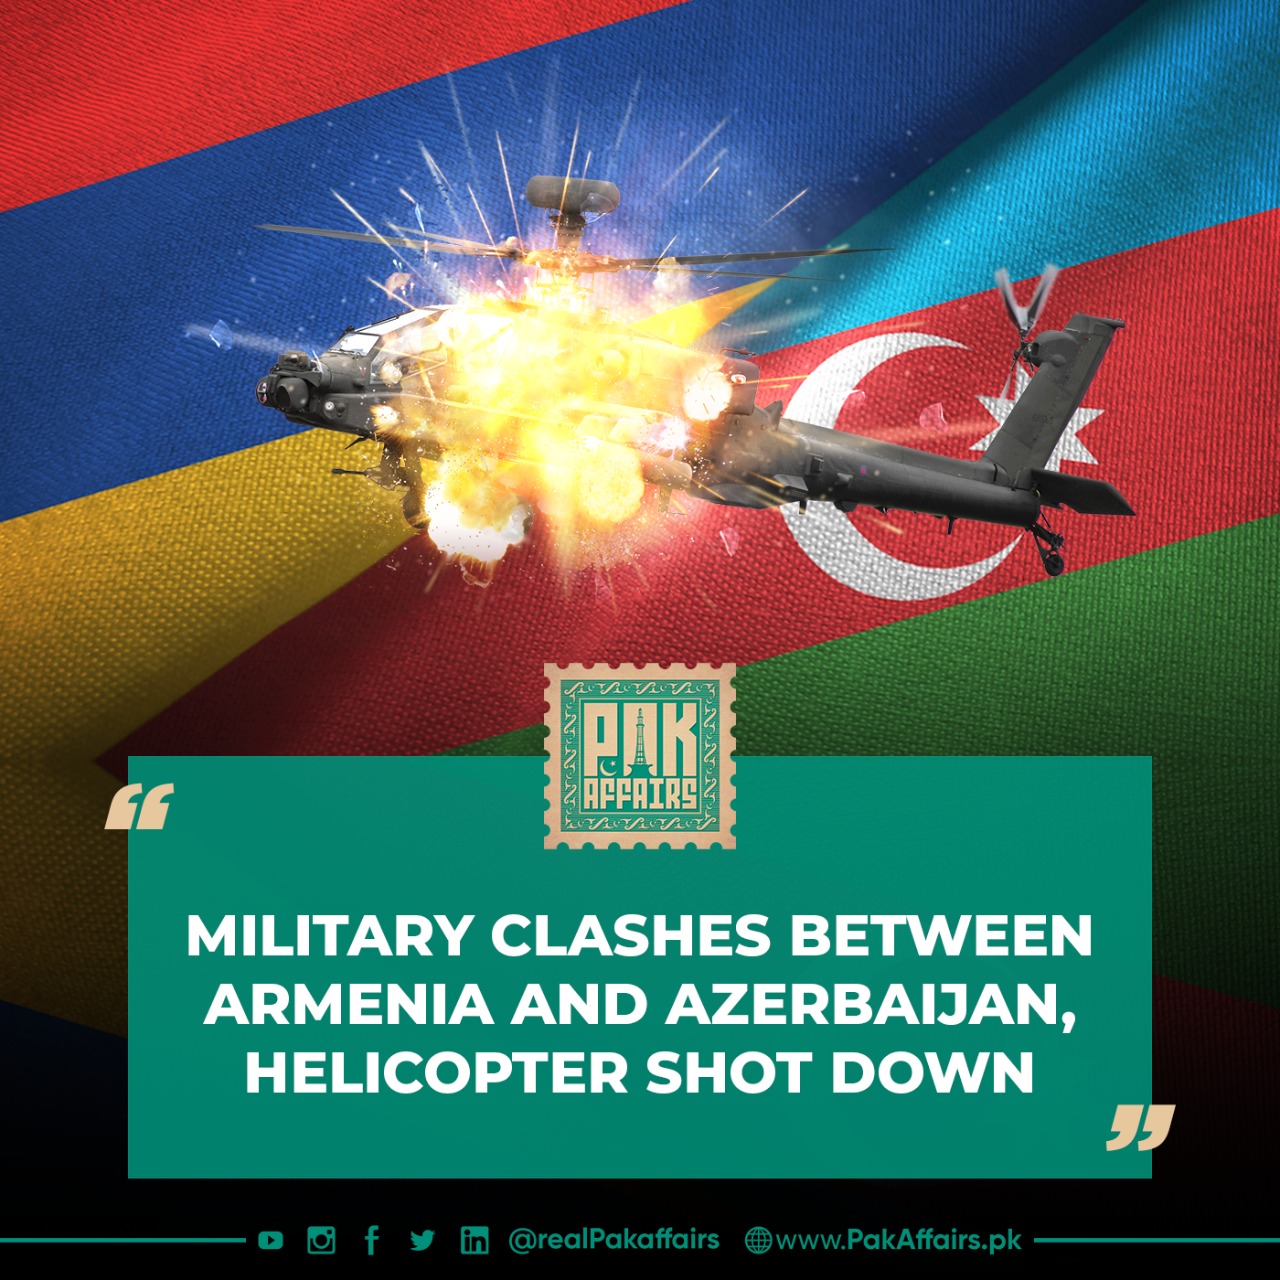 Military clashes between Armenia and Azerbaijan, helicopter shot down.